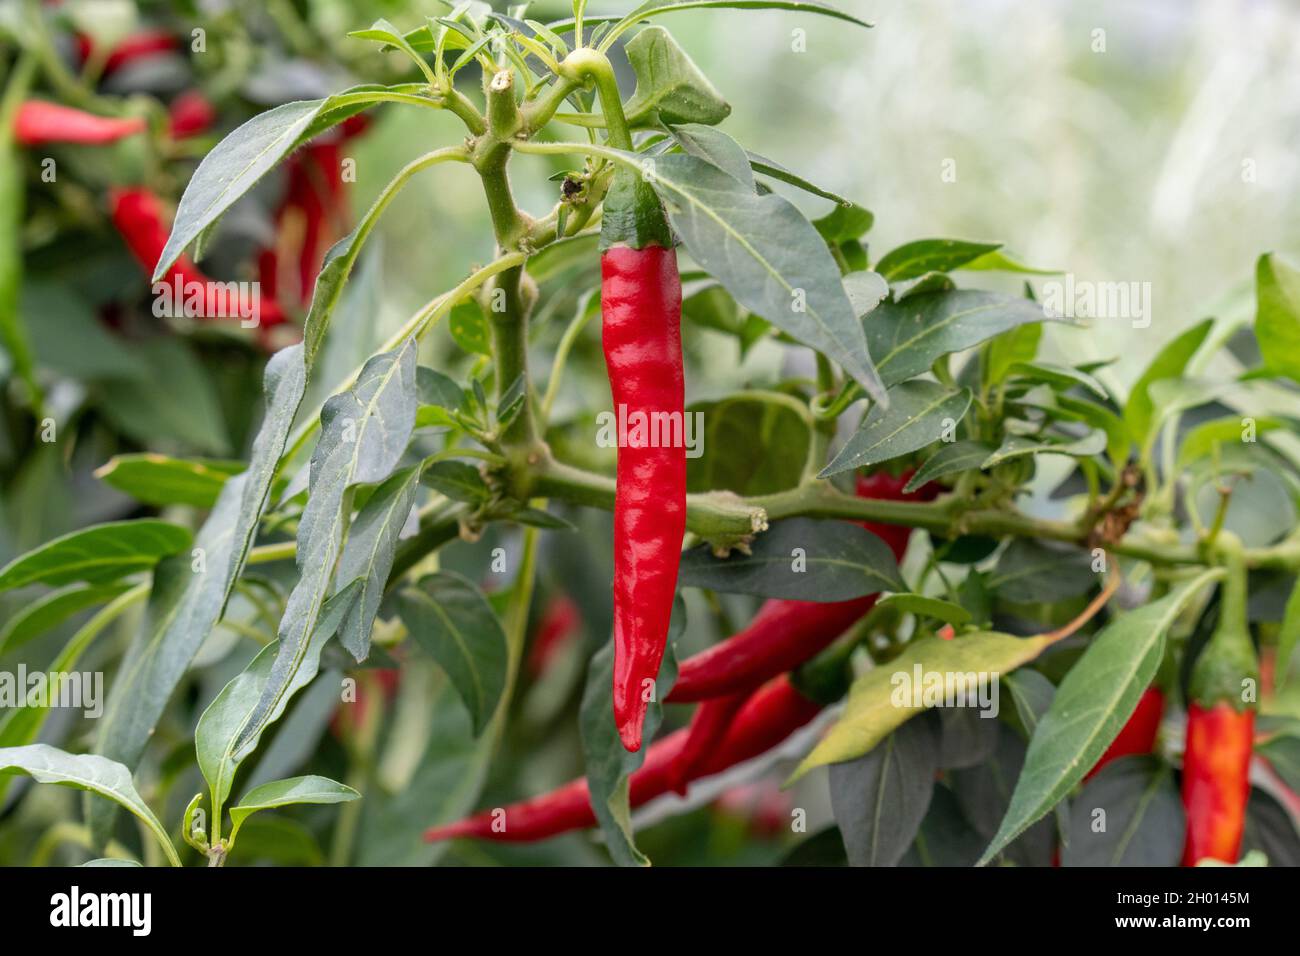 Focus on nature red chilli pepper with green leaves in garden Stock Photo